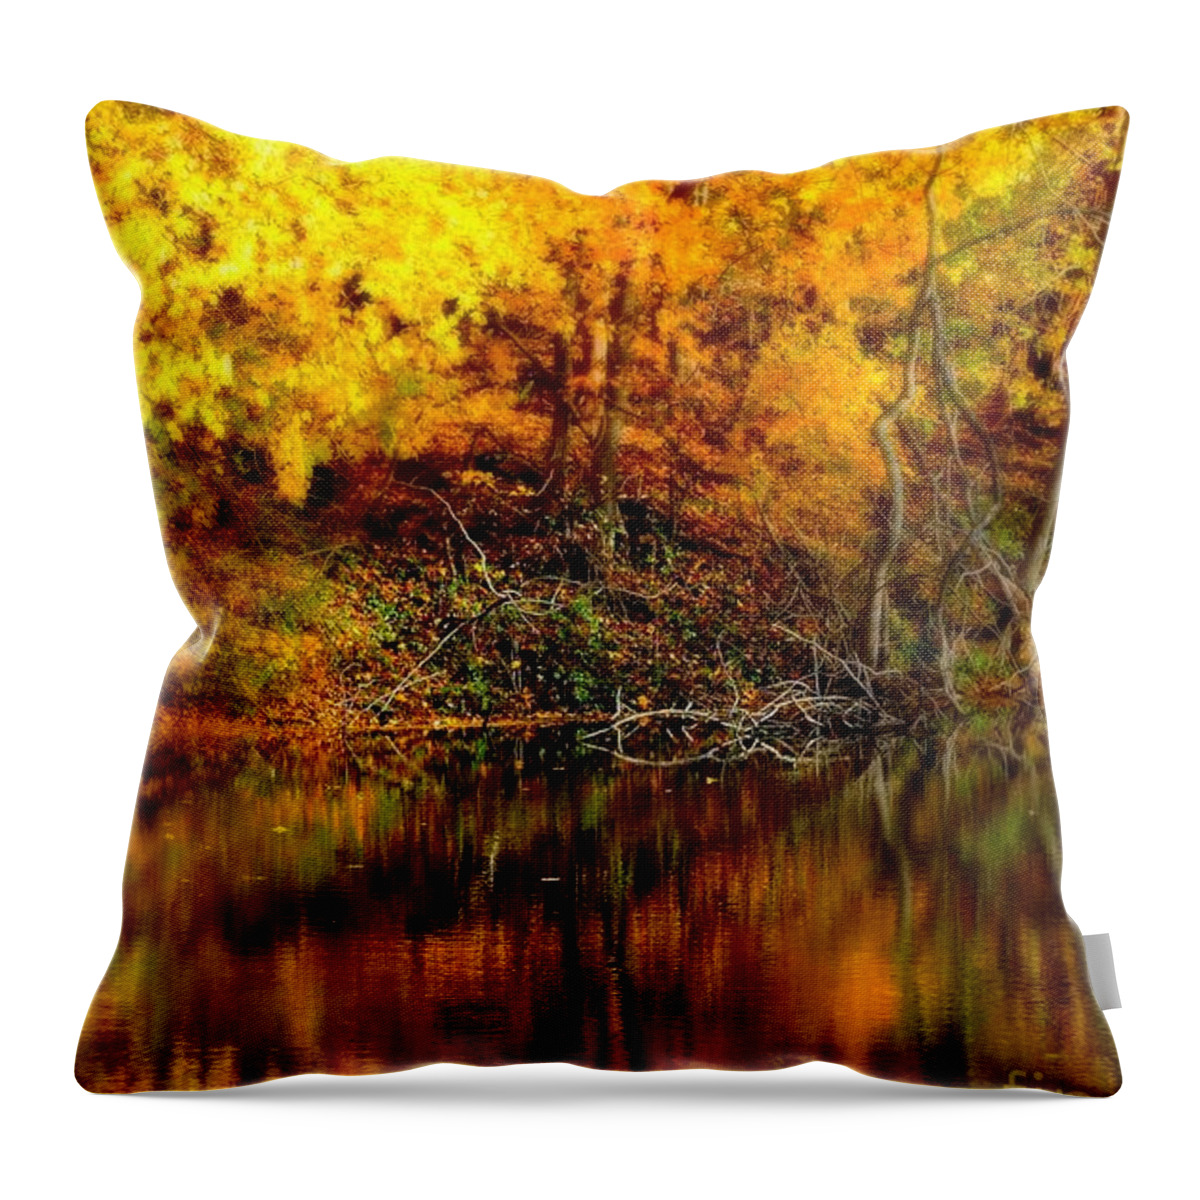 Autumn Throw Pillow featuring the photograph Still Gold by Tami Quigley